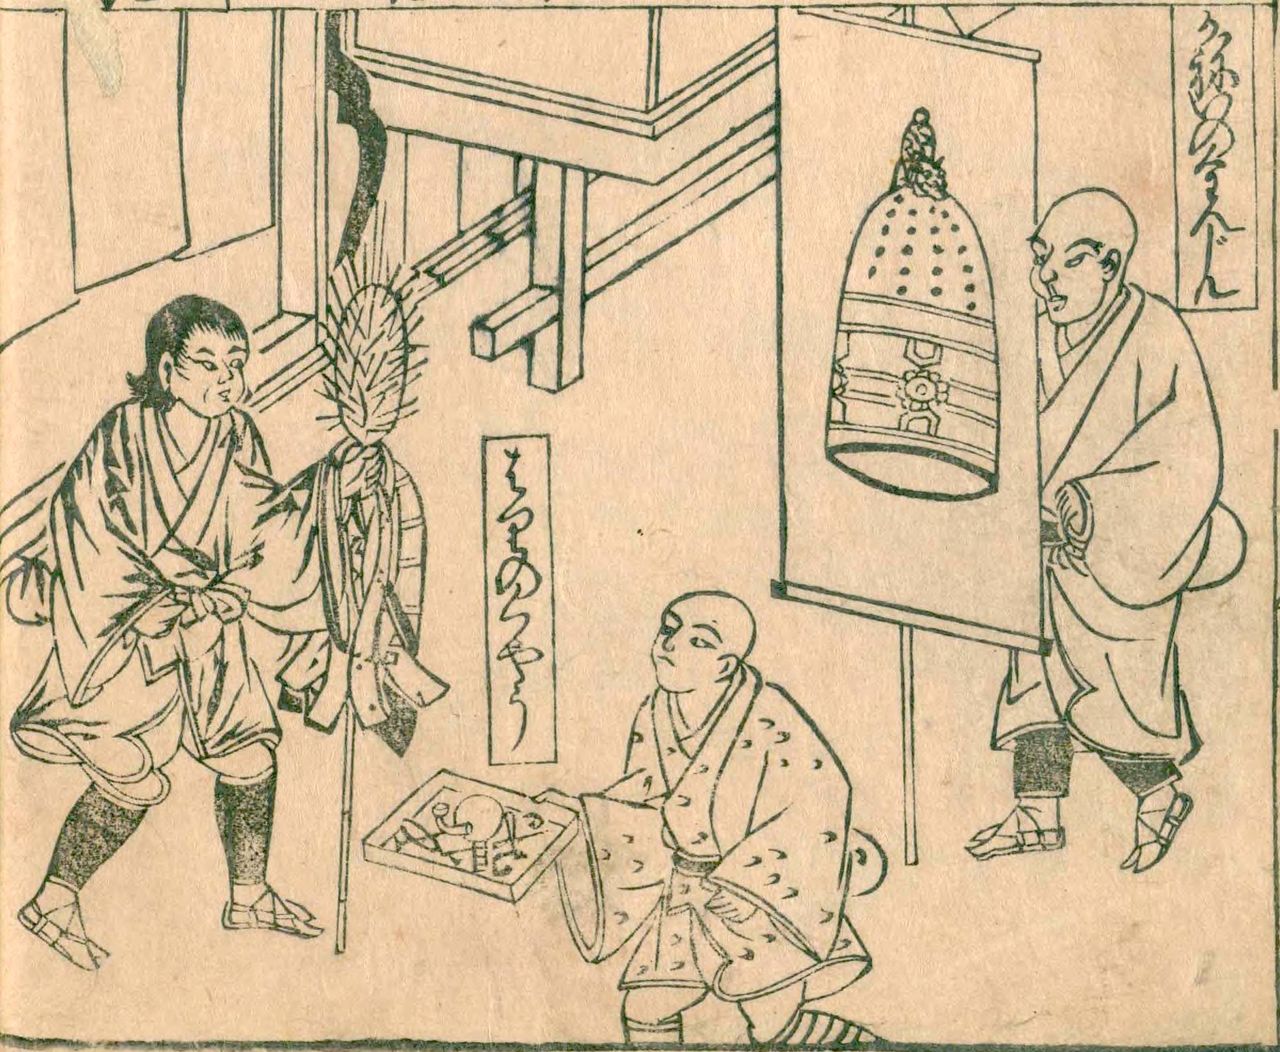  A man, presumably a needle maker or tailor, with a doll used for collecting old needles joins two priests conducting hari-kuyō services, as depicted in Jinrinkinmōzui. Young women were often pressured into paying for such memorial services. (Courtesy National Diet Library)